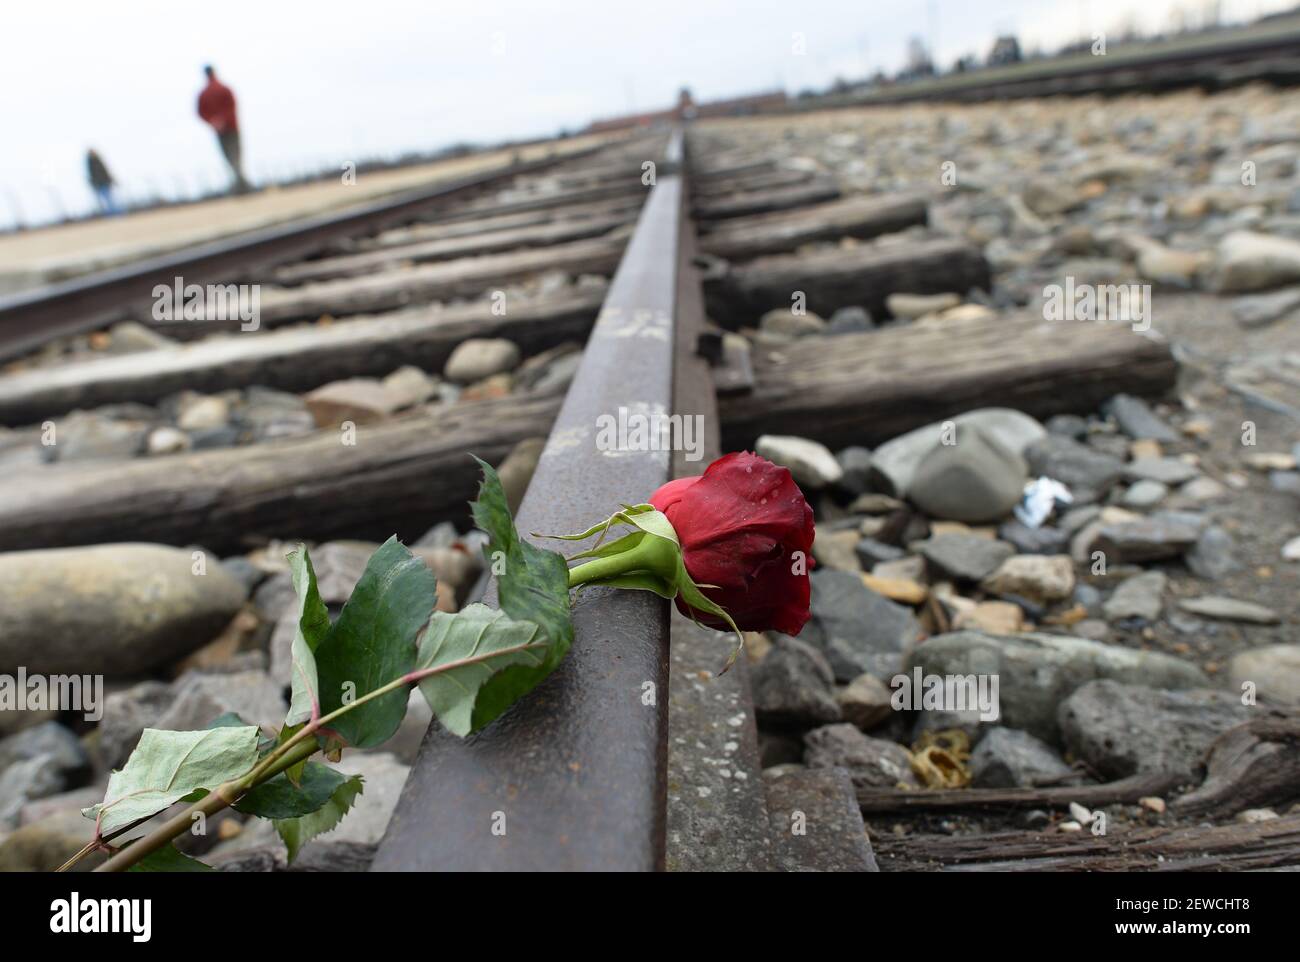 An image from Auschwitz-Birkenau on the day of 71st Anniversary of the Liberation of the former Nazi German Concentration and Extermination Camp in Auschwitz-Birkenau.  Brzezinka (Auschwitz-Birkenau) camp, Oswiecim, Poland. On 27 January 2016. Stock Photo